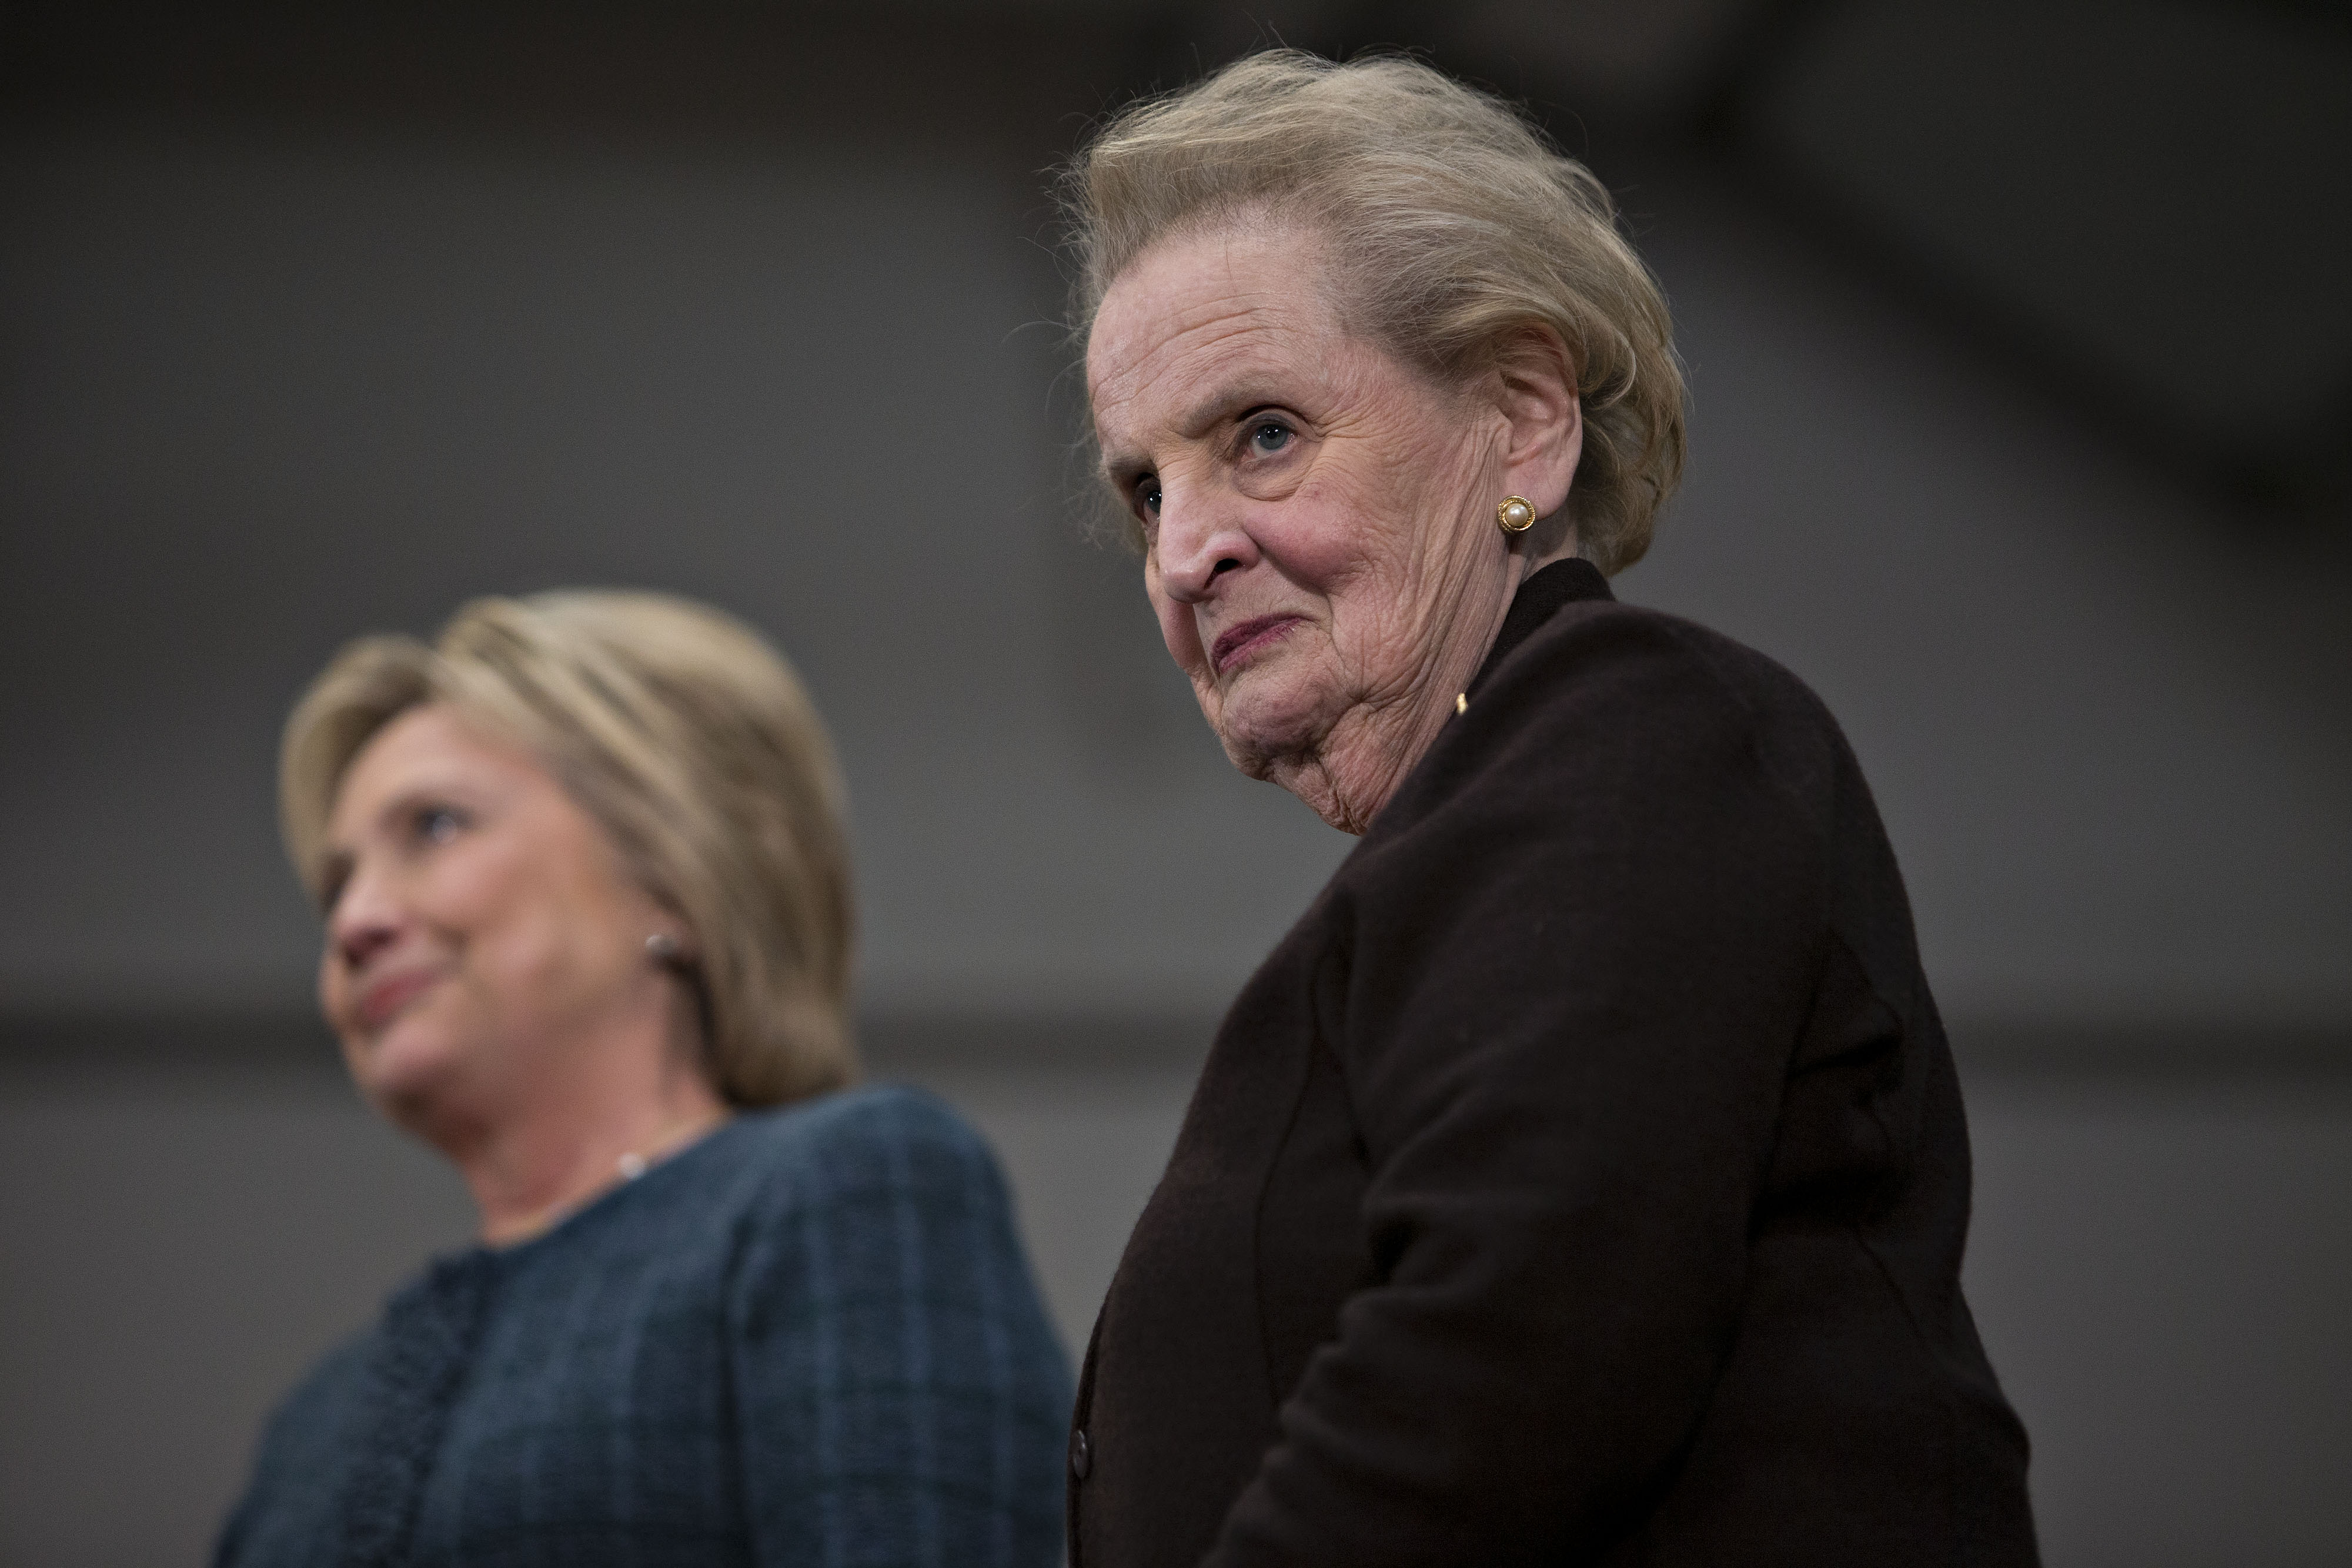 Madeleine Albright, right, joins Hilary Clinton, left, in Concord, N.H. on Feb. 6, 2016. (Daniel Acker—Getty Images)